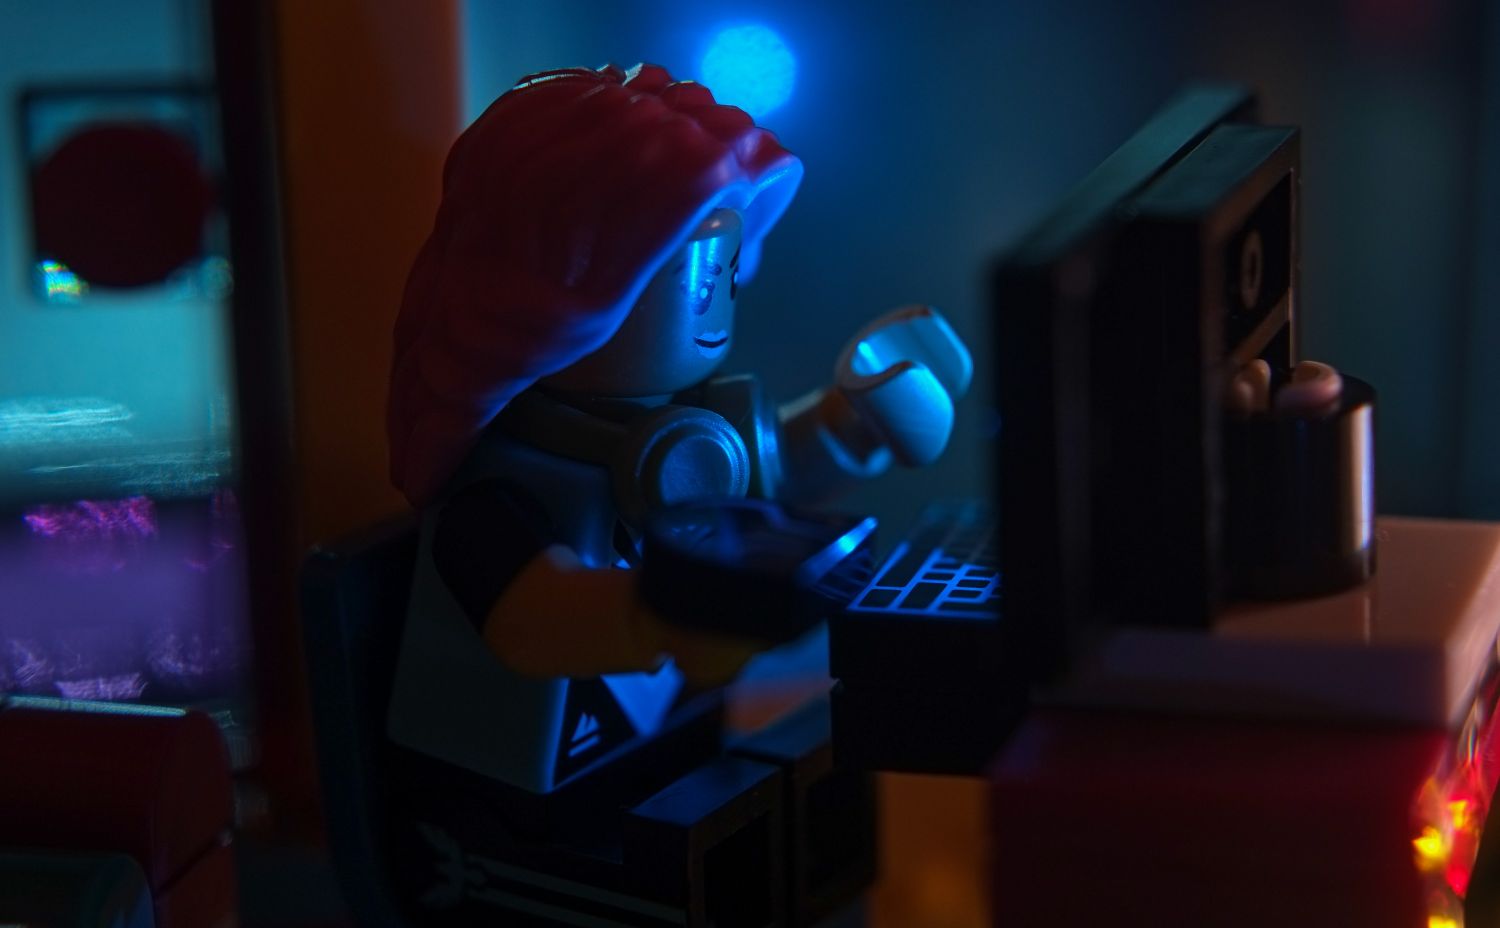 A LEGO video player minifigure in low key, lit only by the light form the computer monitor.